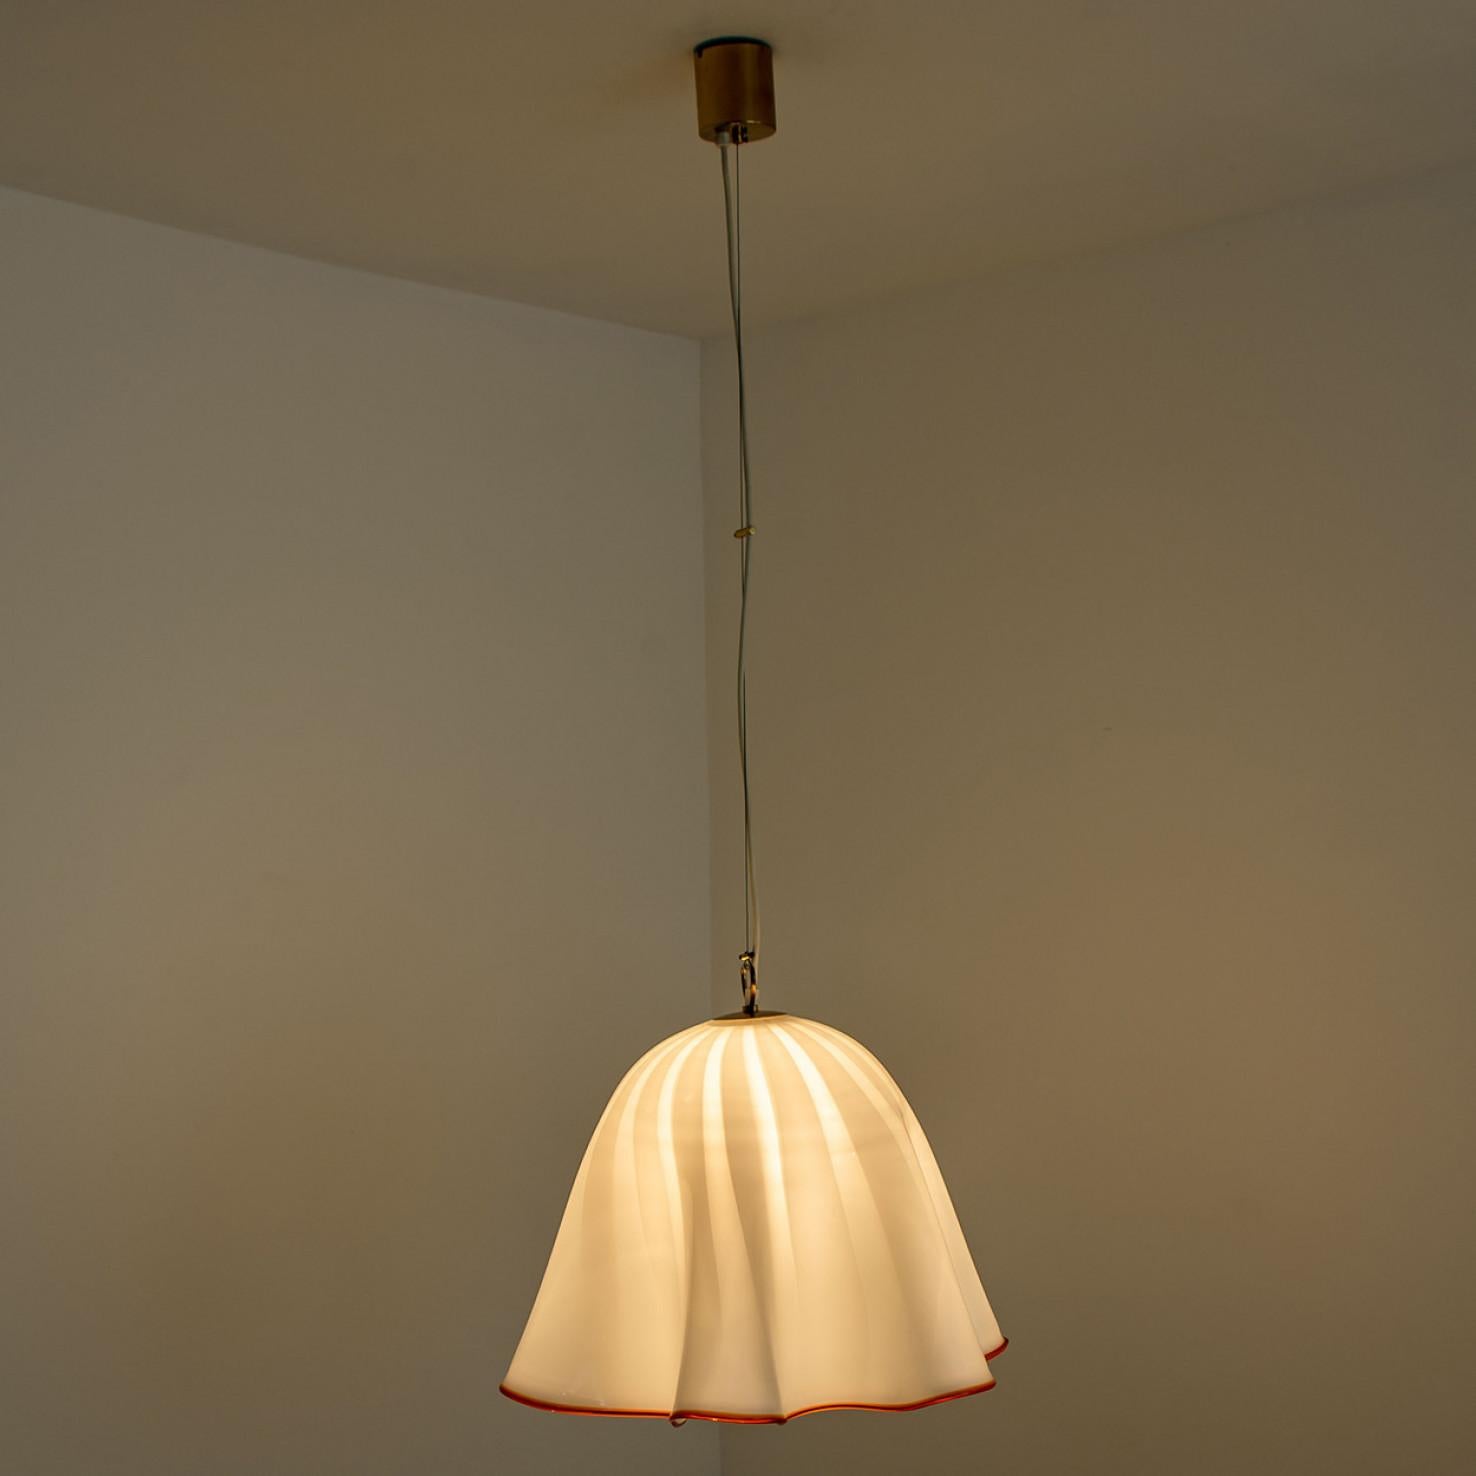 1 of the 2 Large Murano Glass Fazzoletto Pendant Light by J.T. Kalmar, 1960s For Sale 7